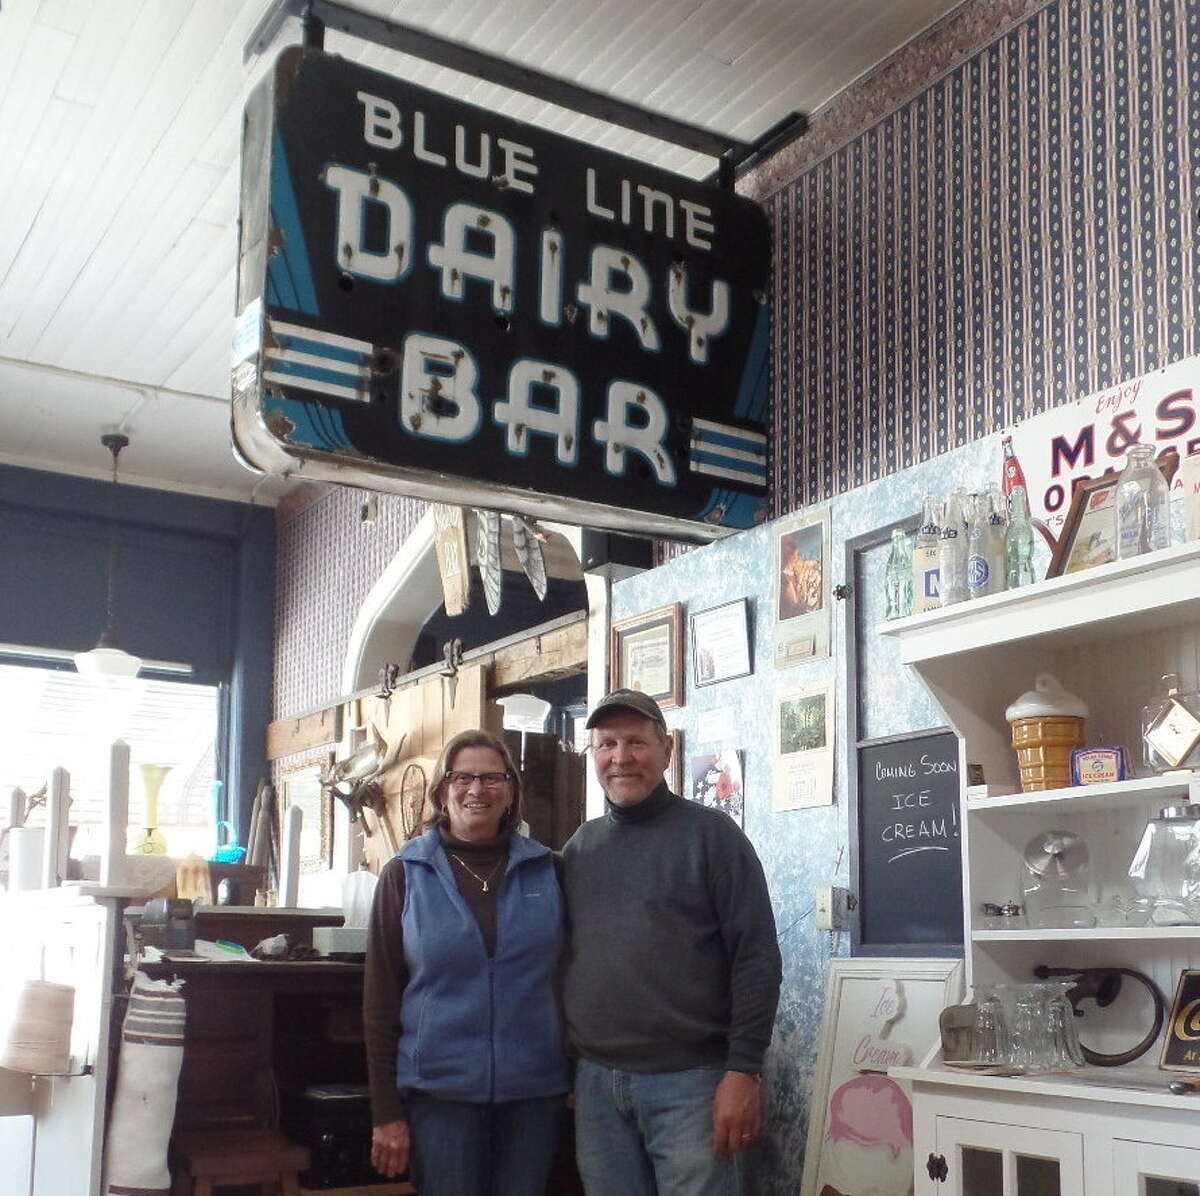 One of Cornerstone Venture’s prize displays is the “Blue Line Dairy — Dairy Bar” sign that used to hang over a malt shop on Union Street. Owners Chris and Doug Deming will soon serve ice cream treats at the antique store and museum.